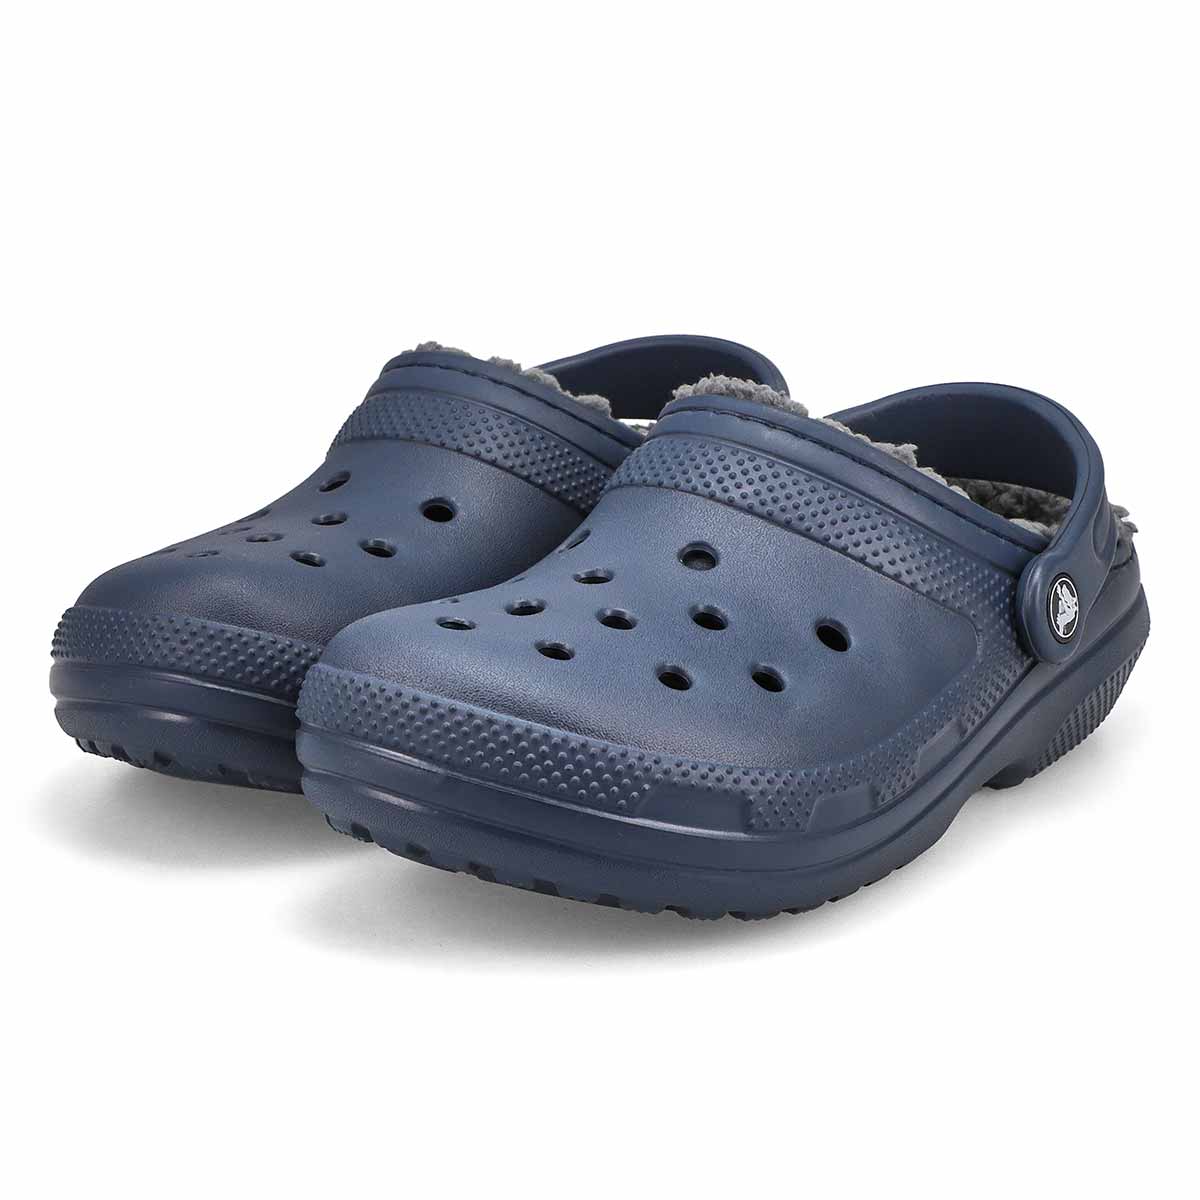 Women's Classic Lined Comfort Clog - Navy/Charcoal